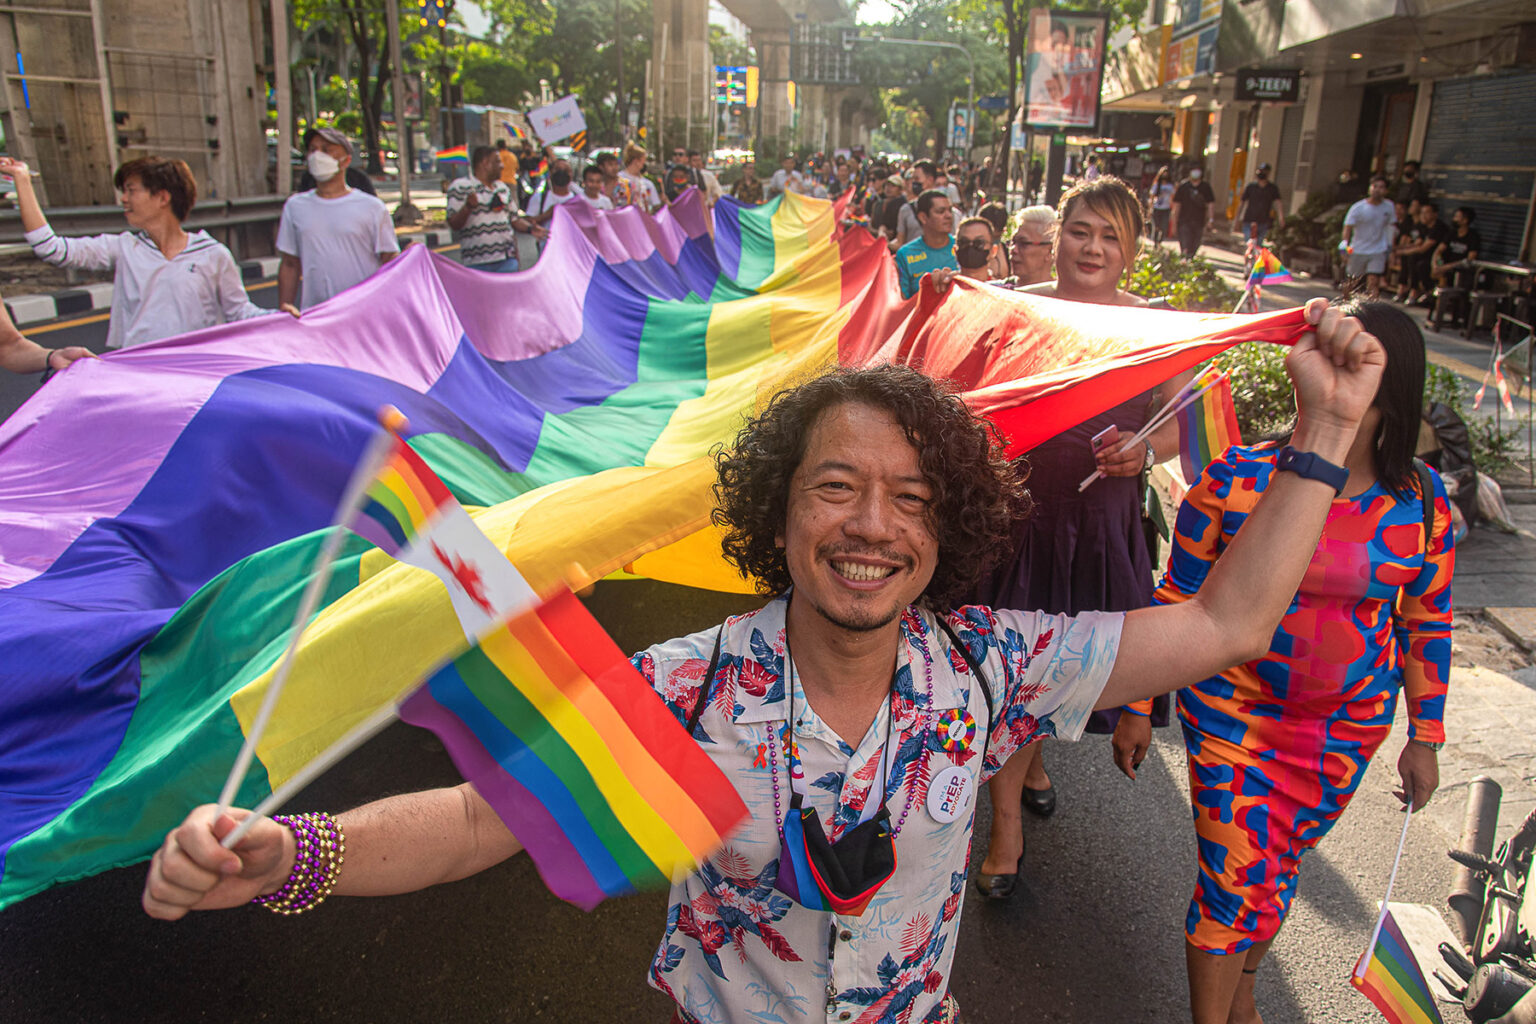 Group of people holding a huge rainbow flag during the Thailand Pride Parade 2022 at Silom road in Bangkok. Man in the front is smiling and holding more small rainbow flags, as well as a Canadian one.